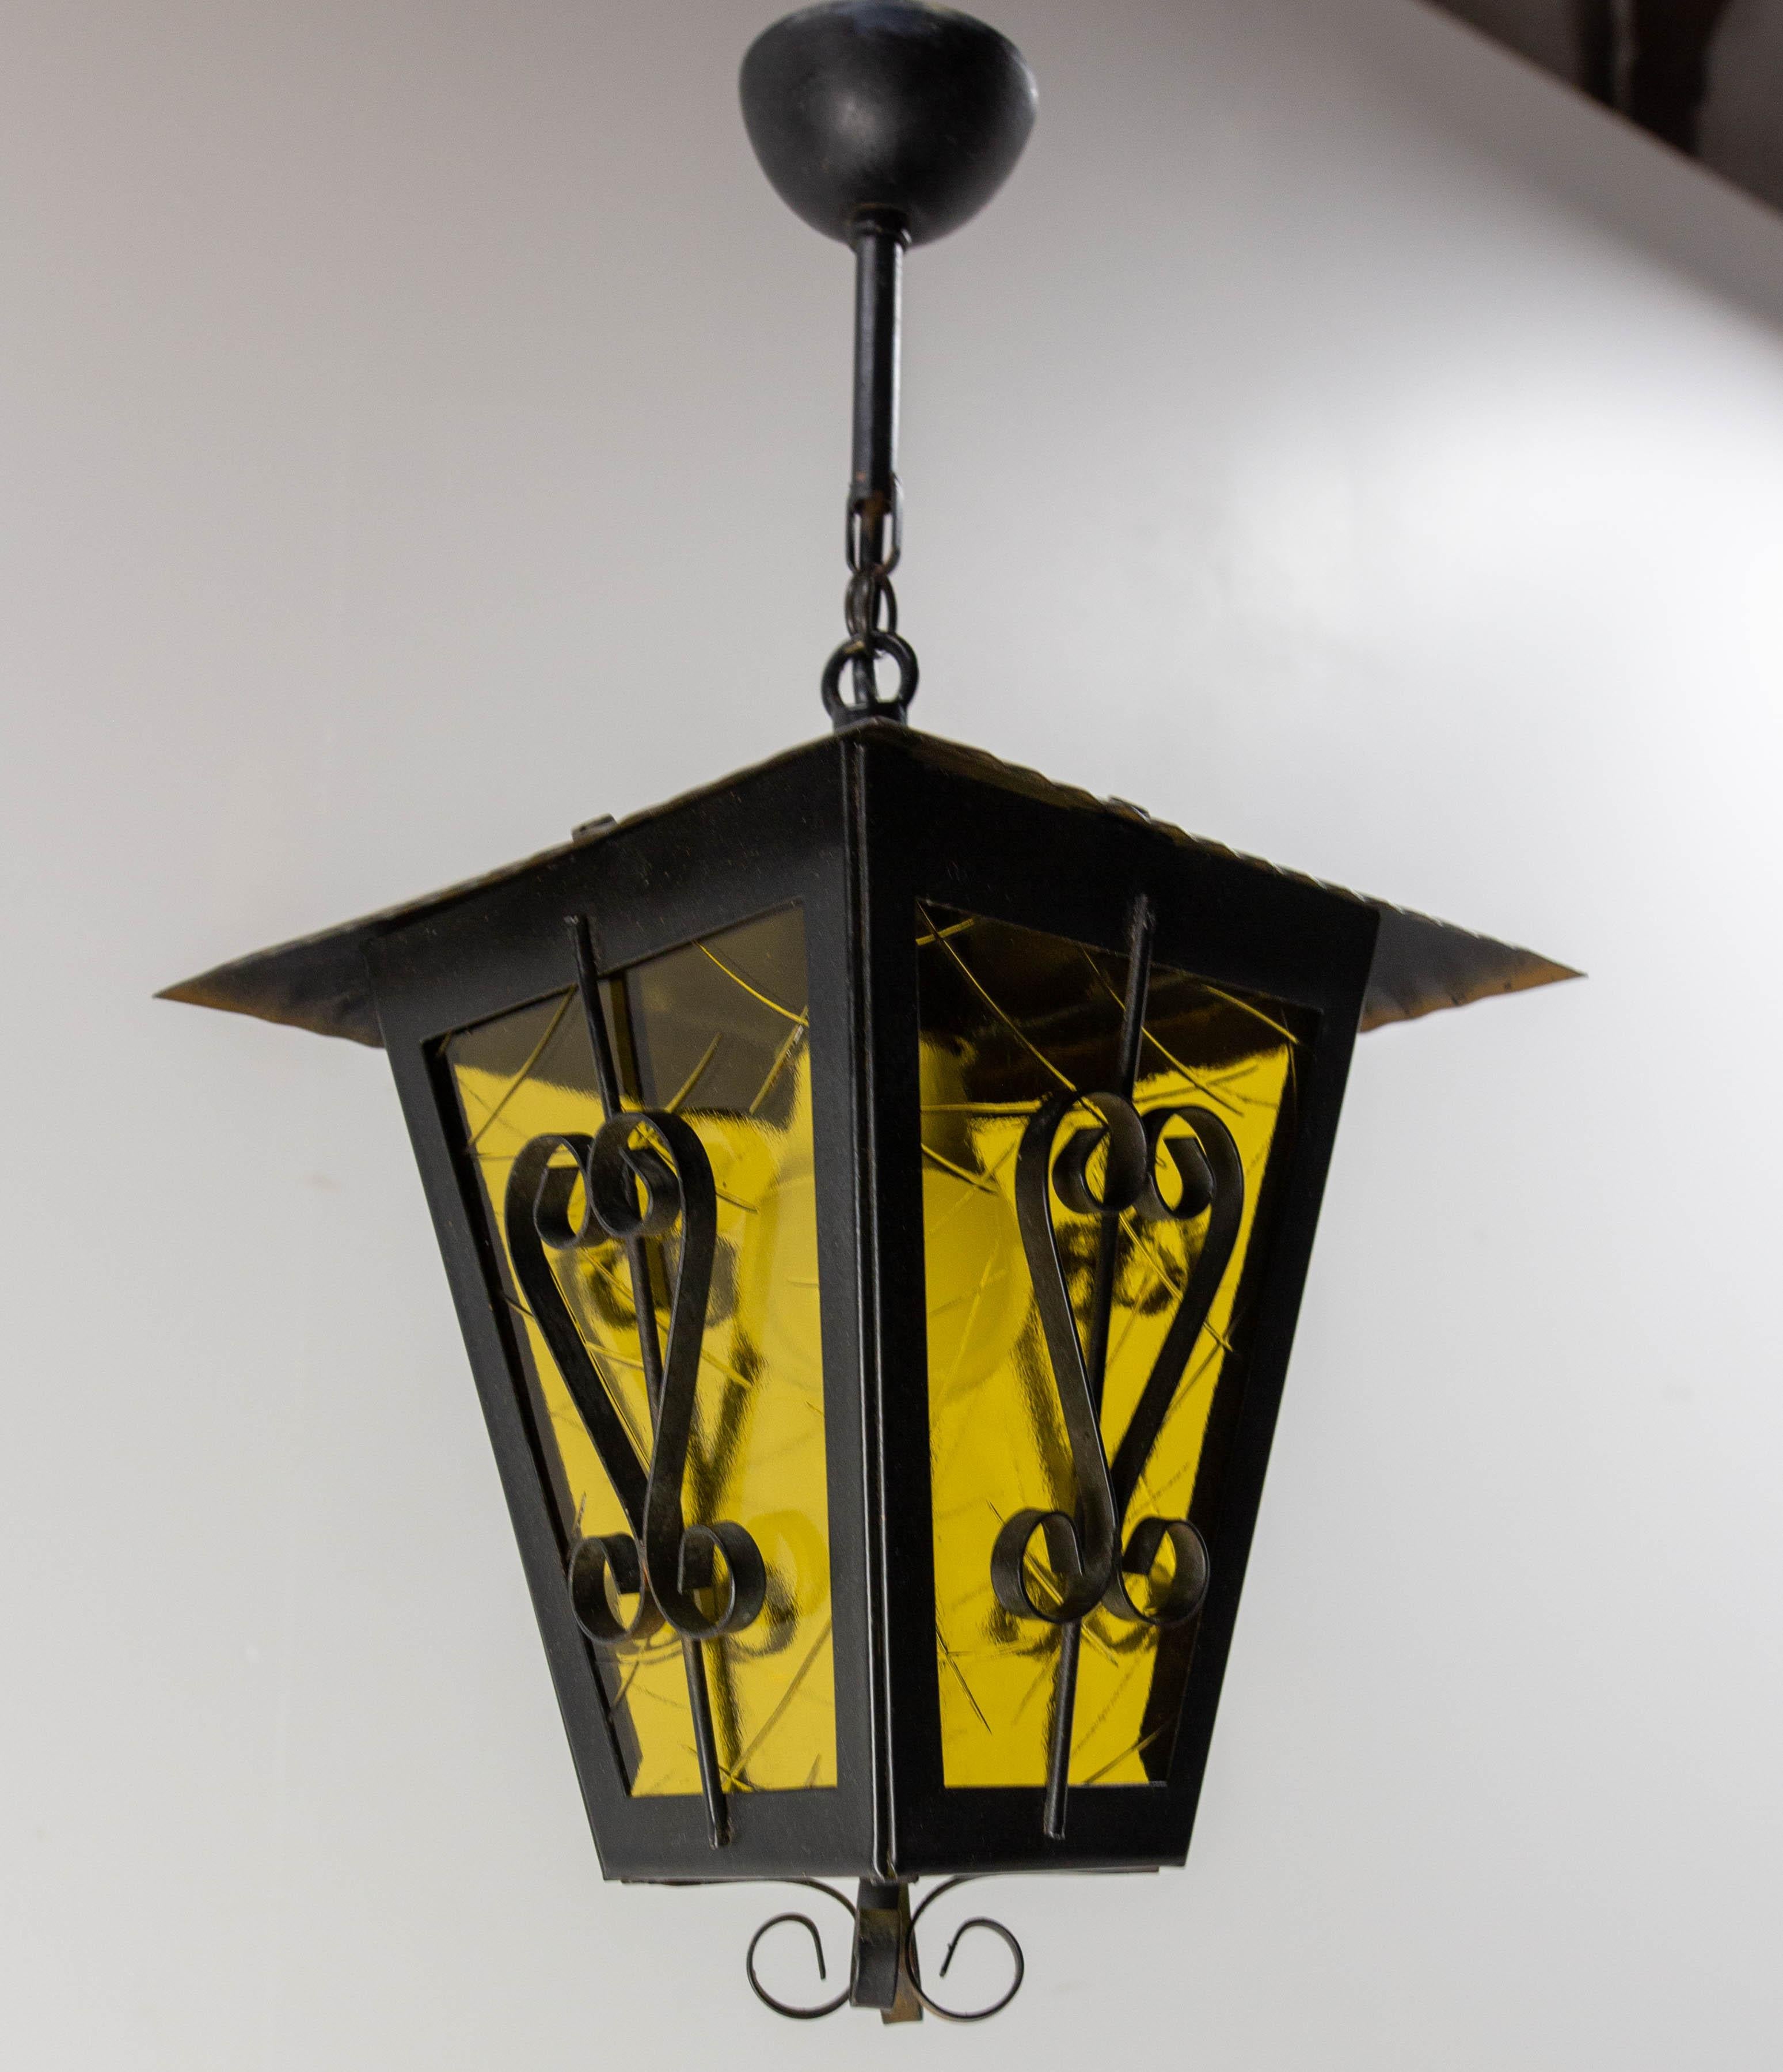 Pendant light chandelier, France, midcentury
Textured yellow glass and iron
This can be rewired to USA, UK and European standards
Good condition.

Shipping
22 / 22 / H 29 cm 1.6 kg

